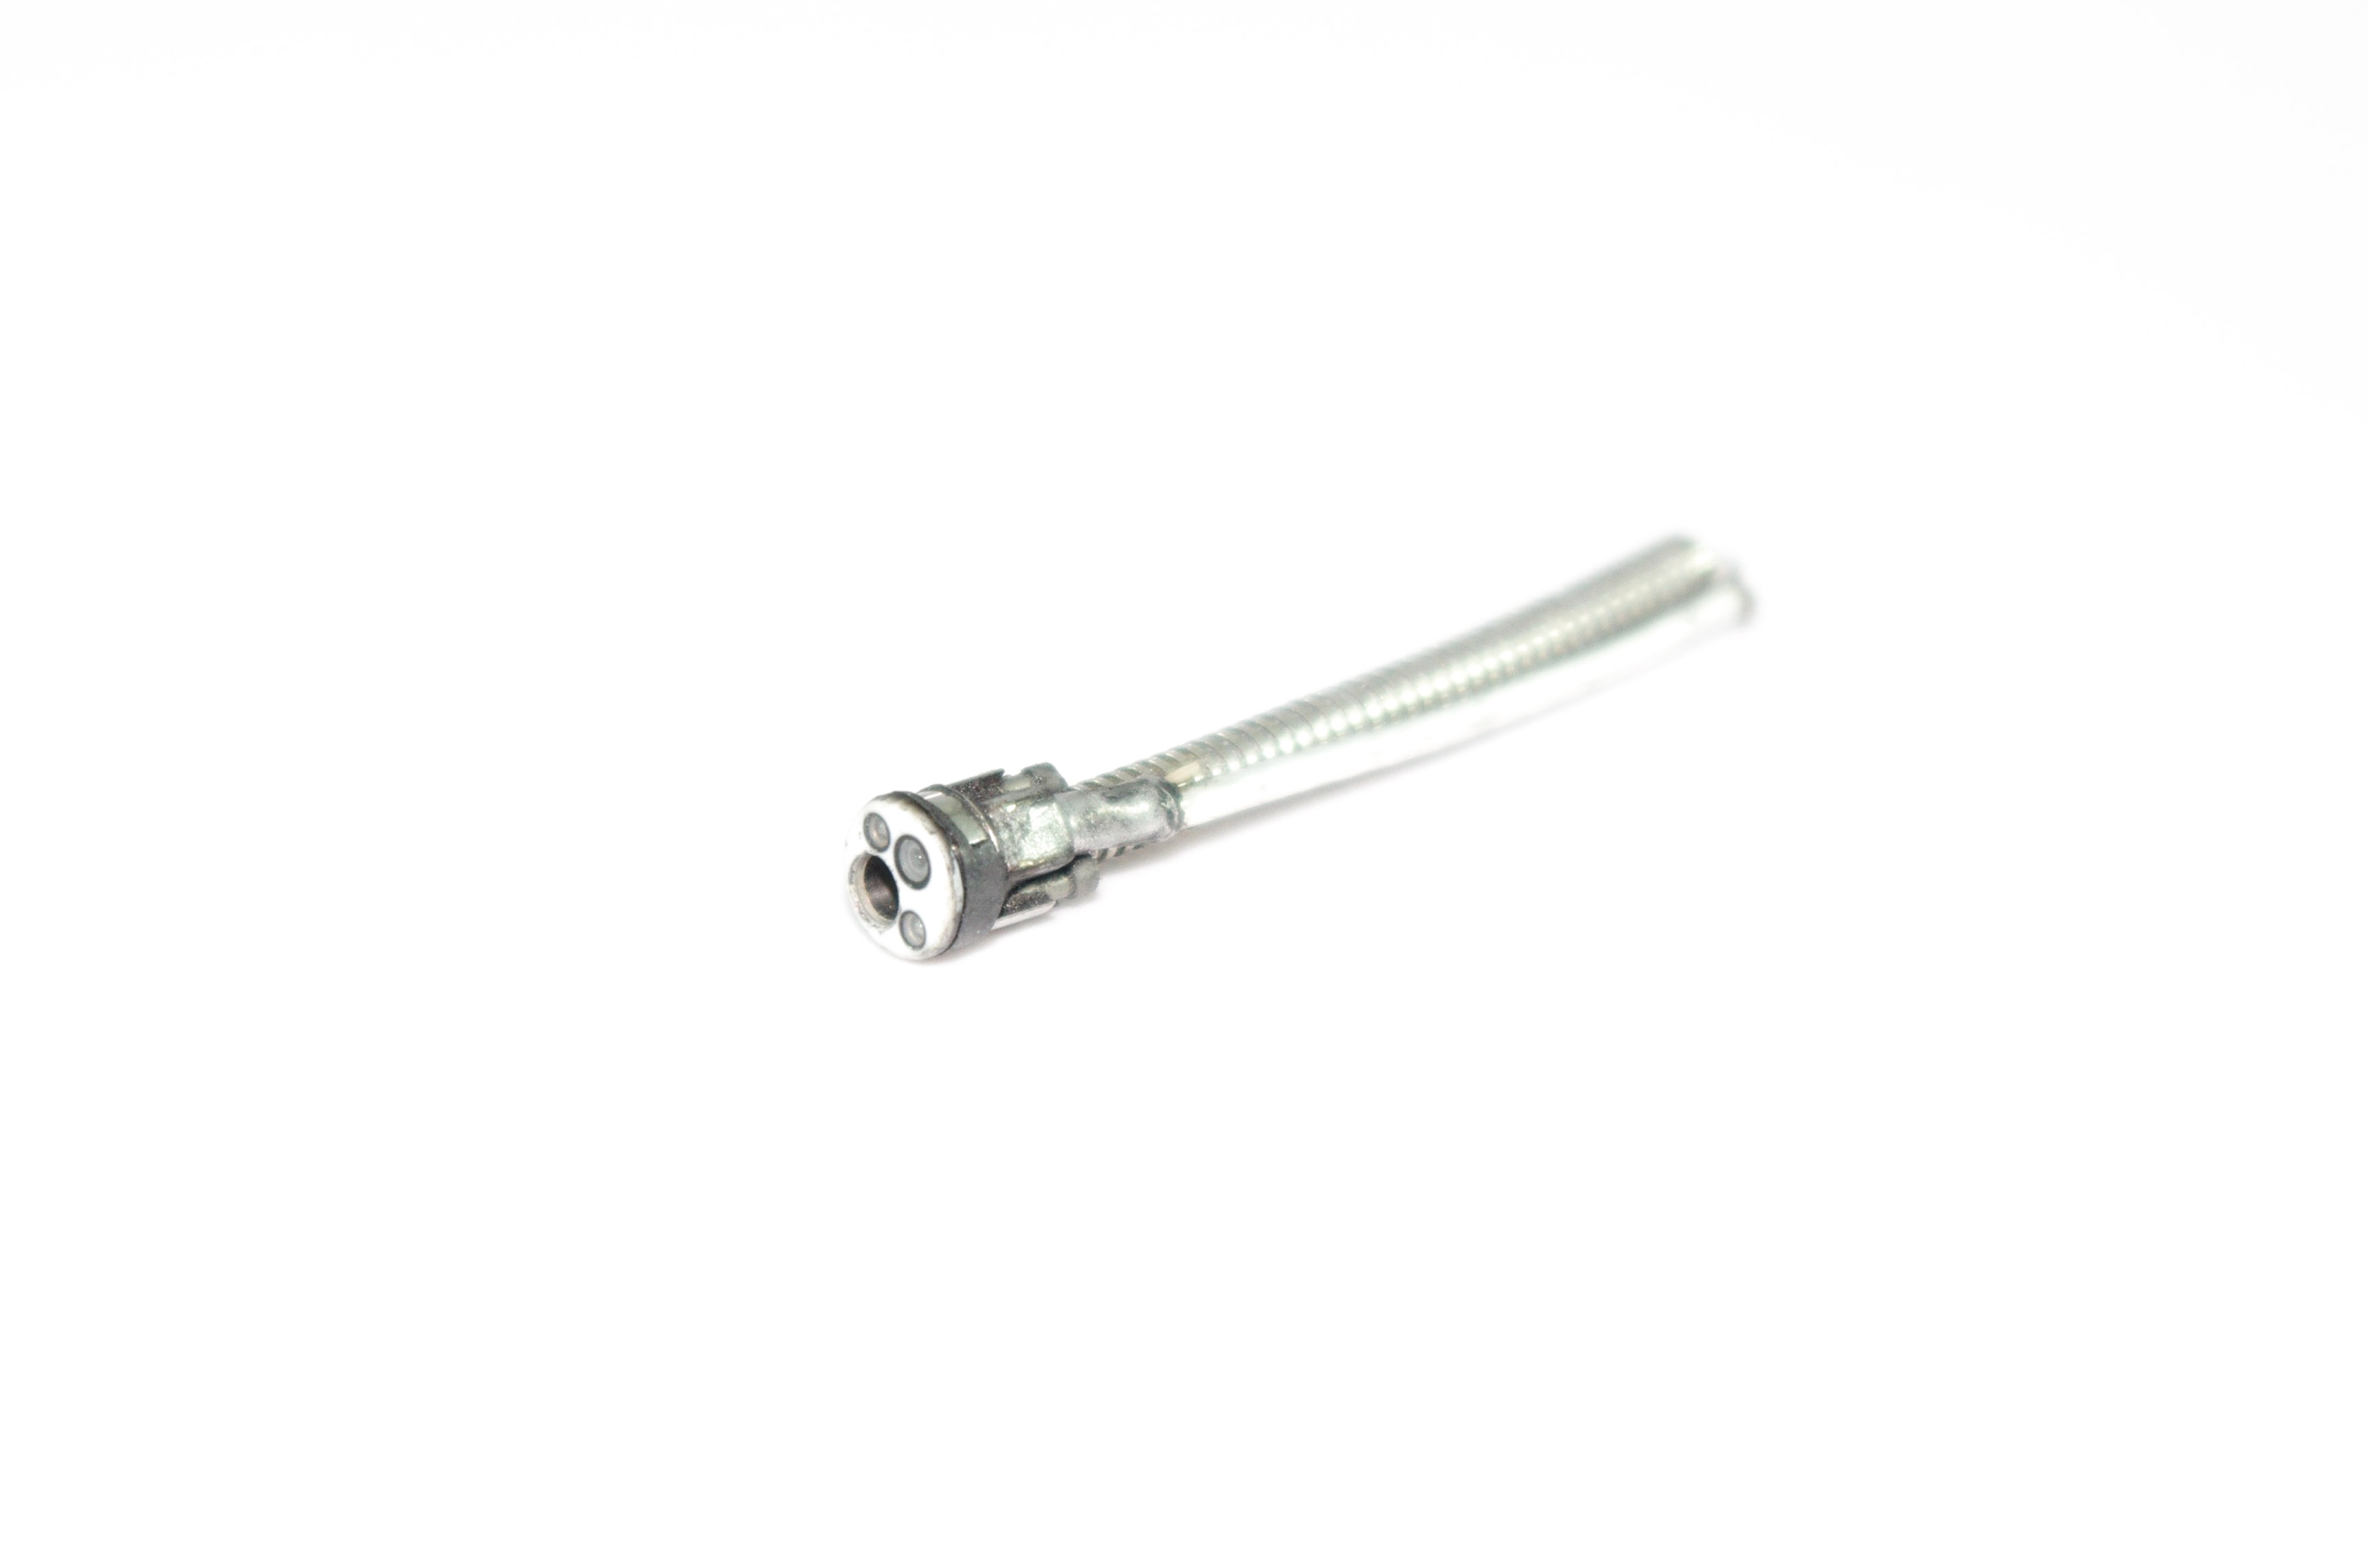 OEM Distal Tip with Lenses and C-Cover - BF-P180